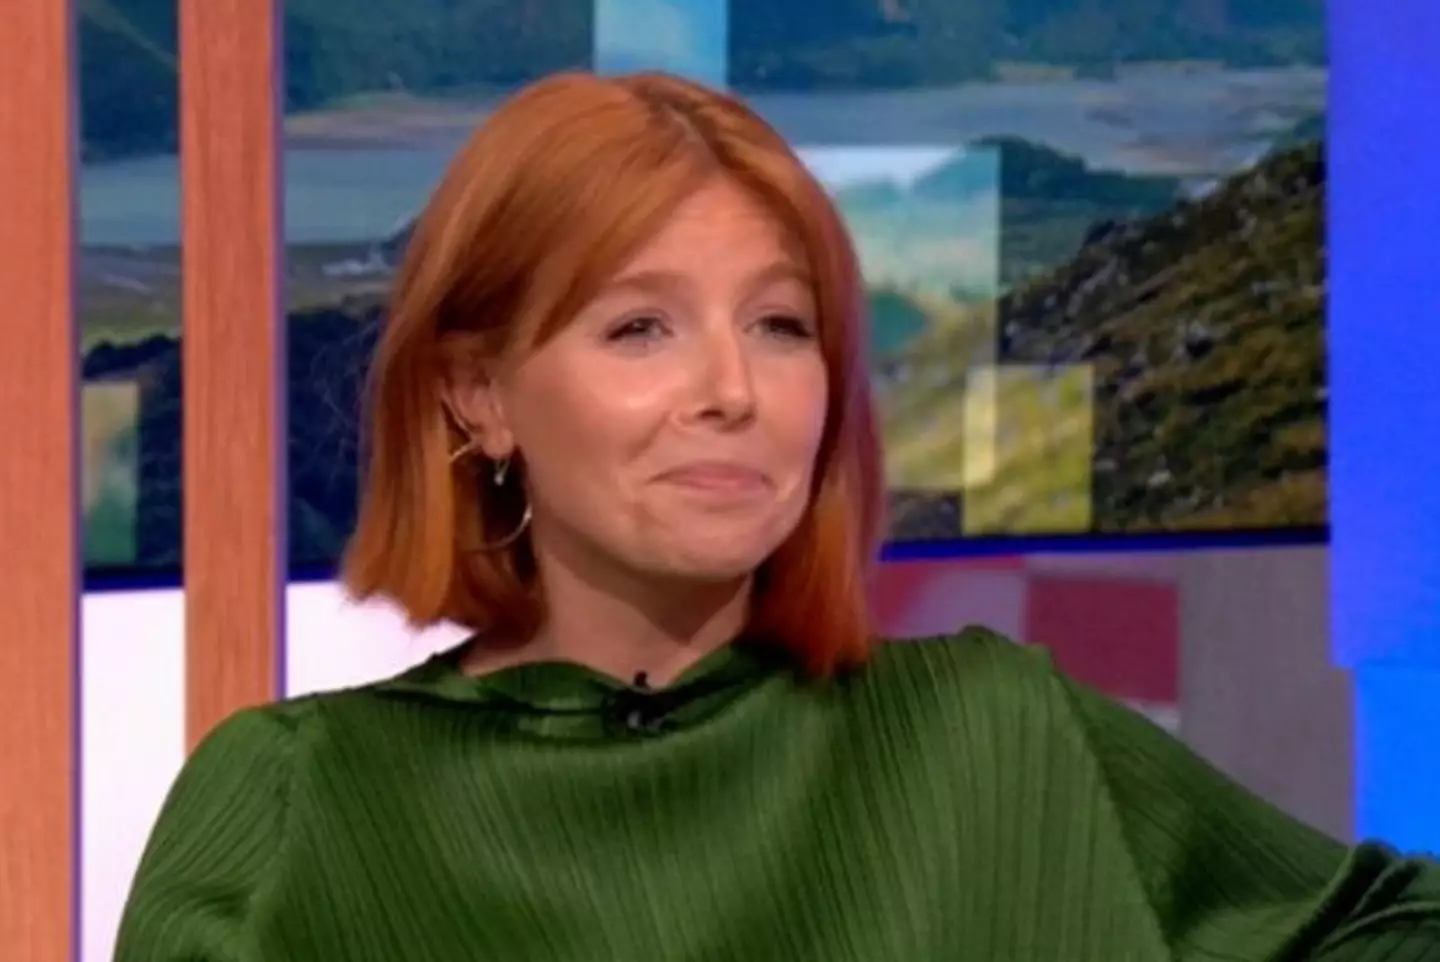 Stacey Dooley said she feels really lucky to be pregnant.